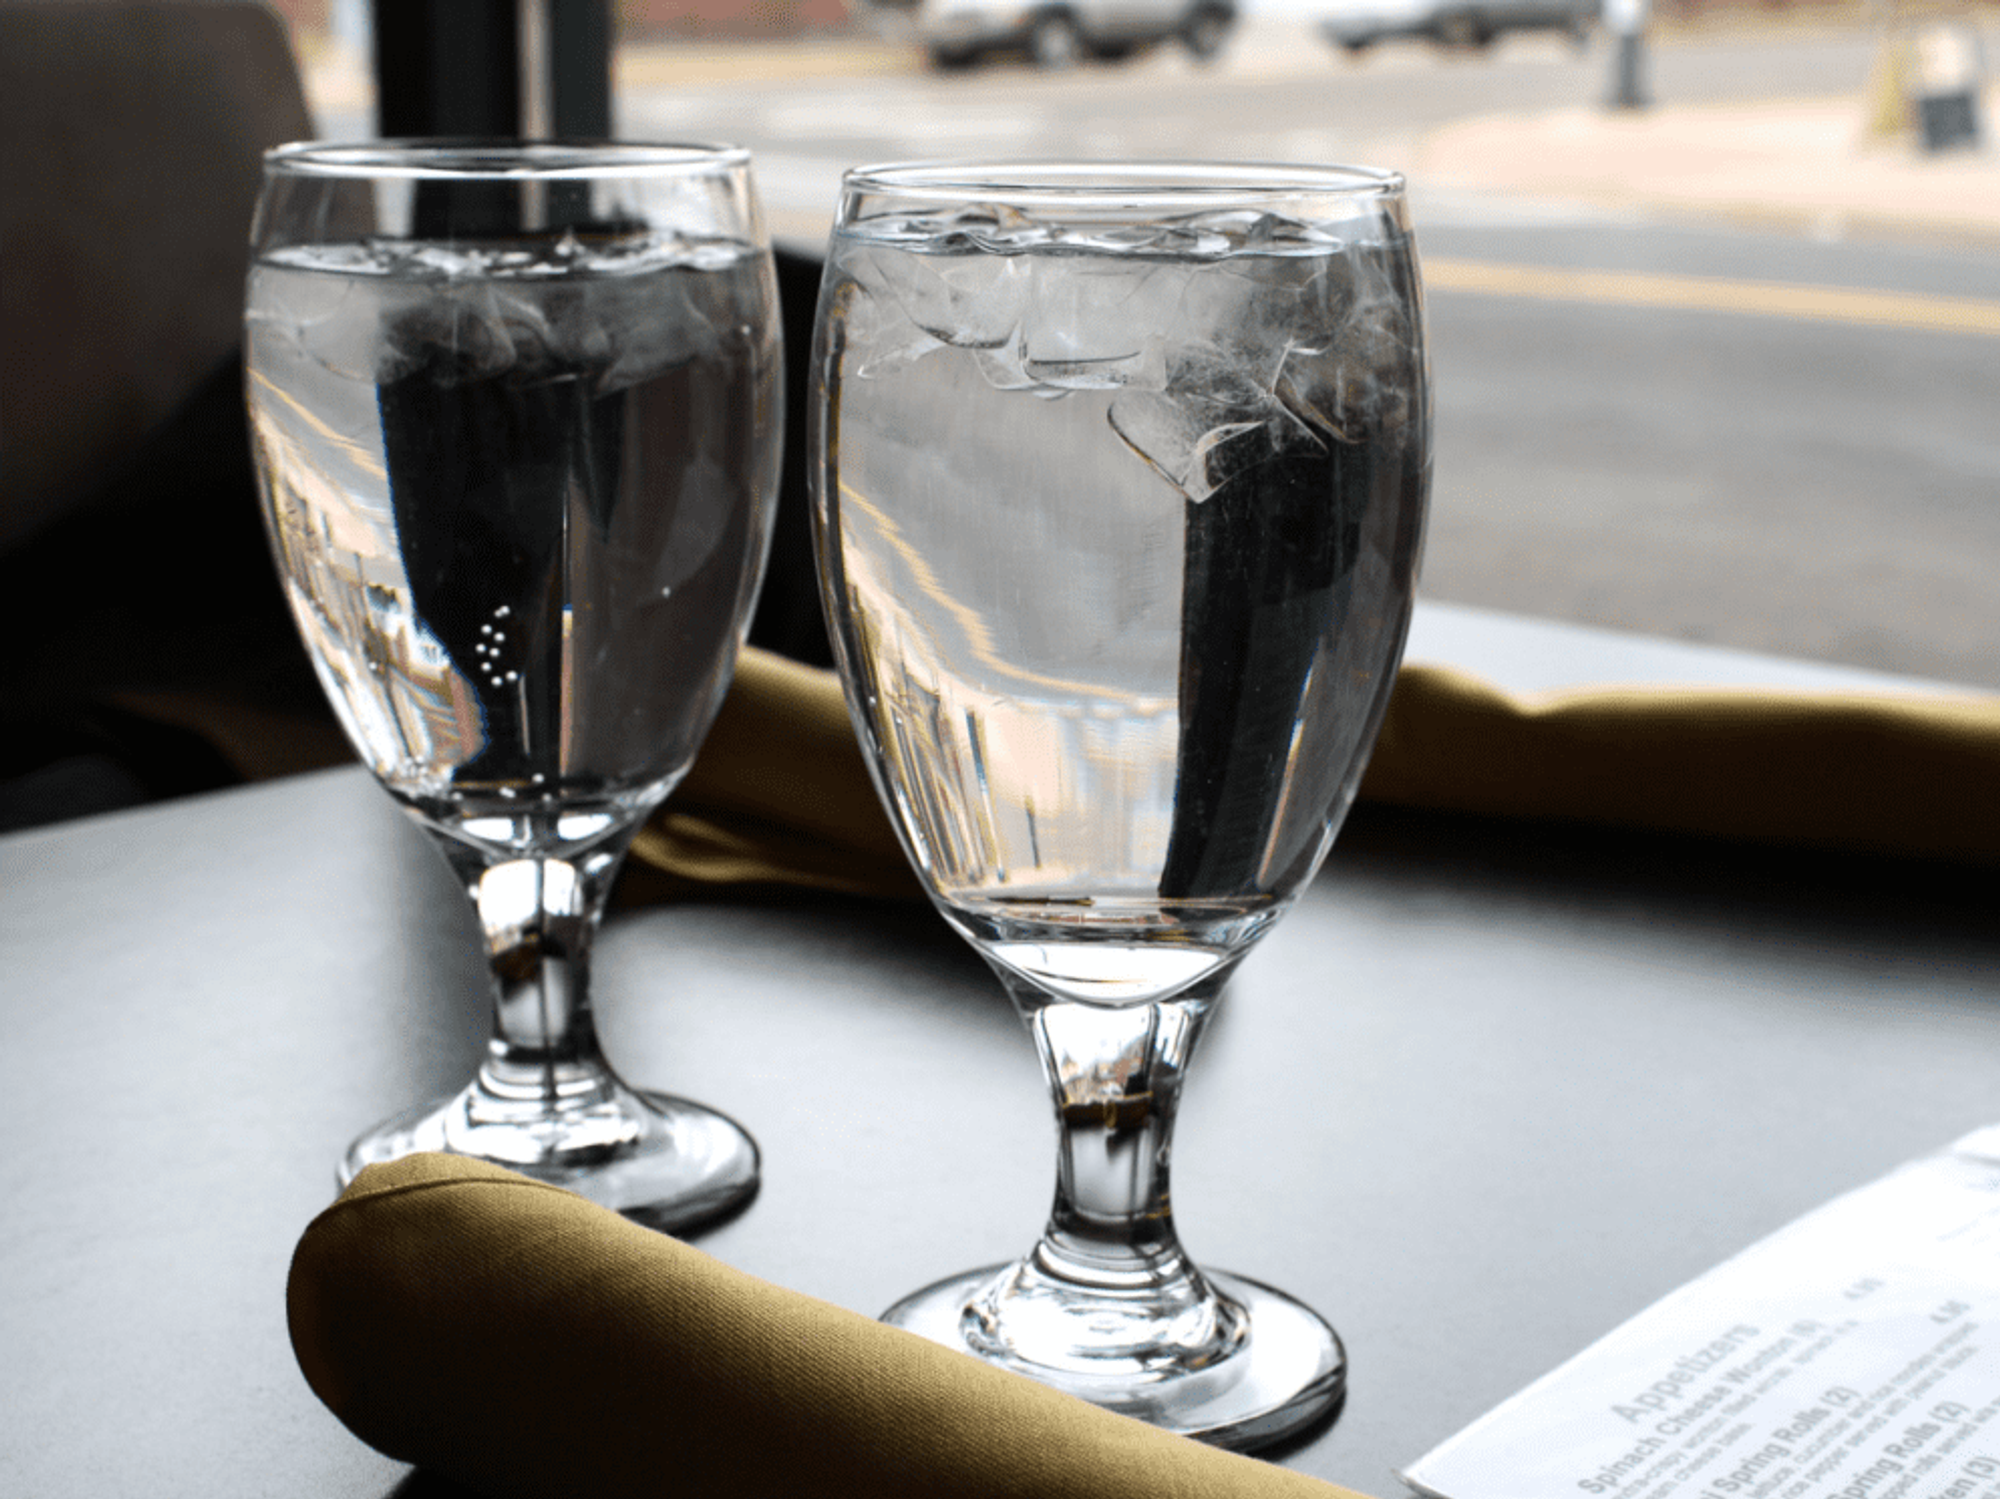 water glasses, glass of water, restaurant table